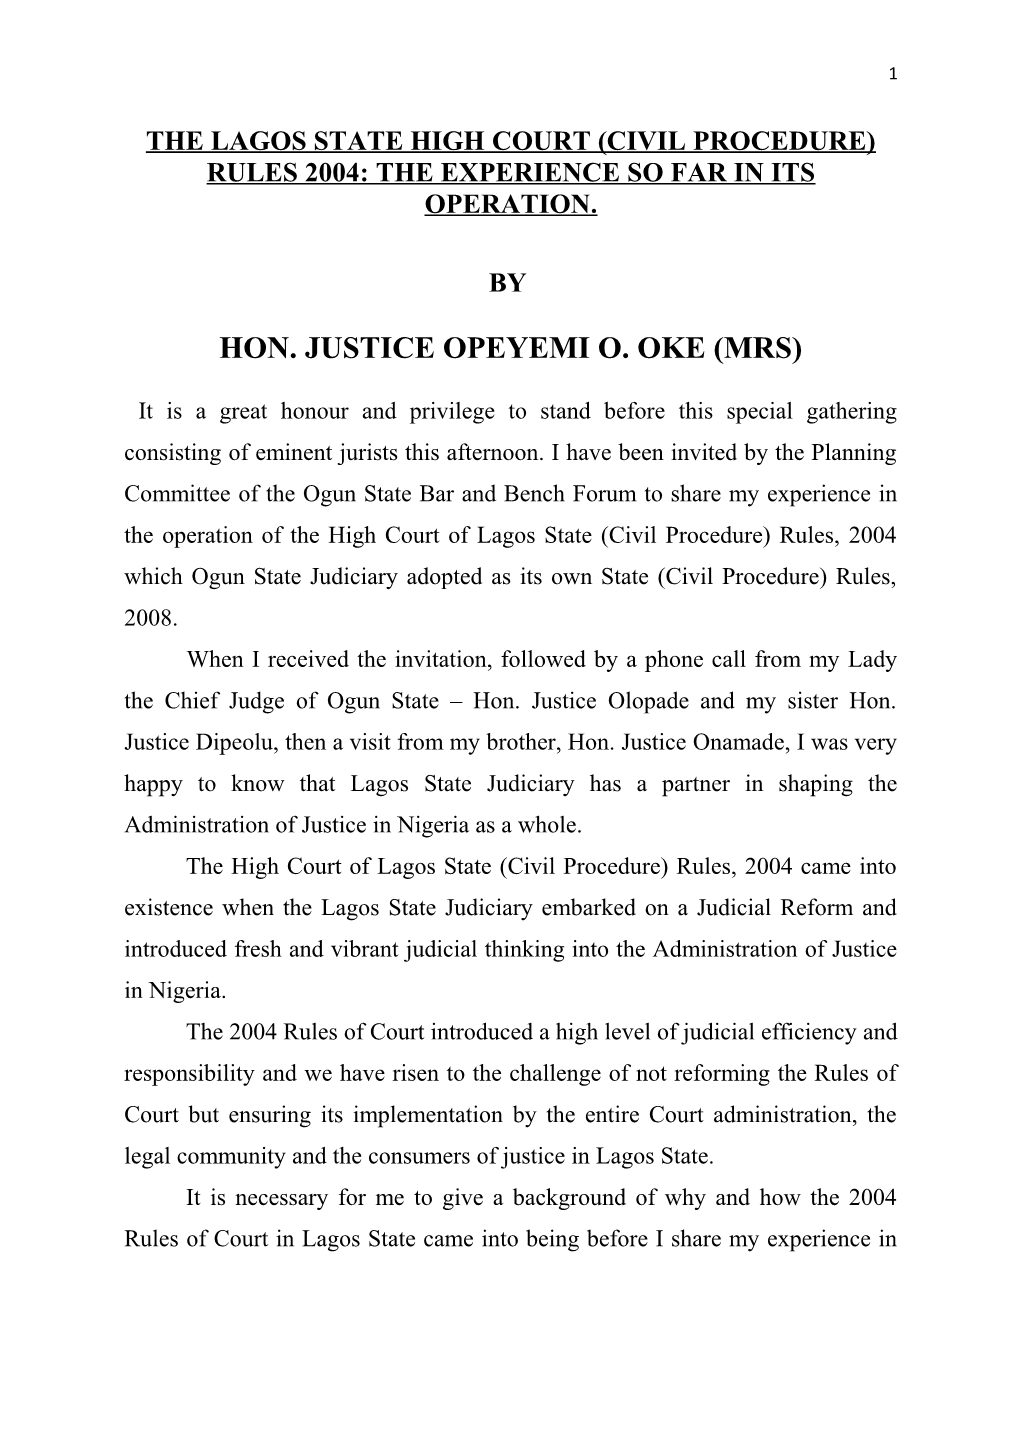 The Lagos State High Court (Civil Procedure) Rules 2004: the Experience So Far in Its